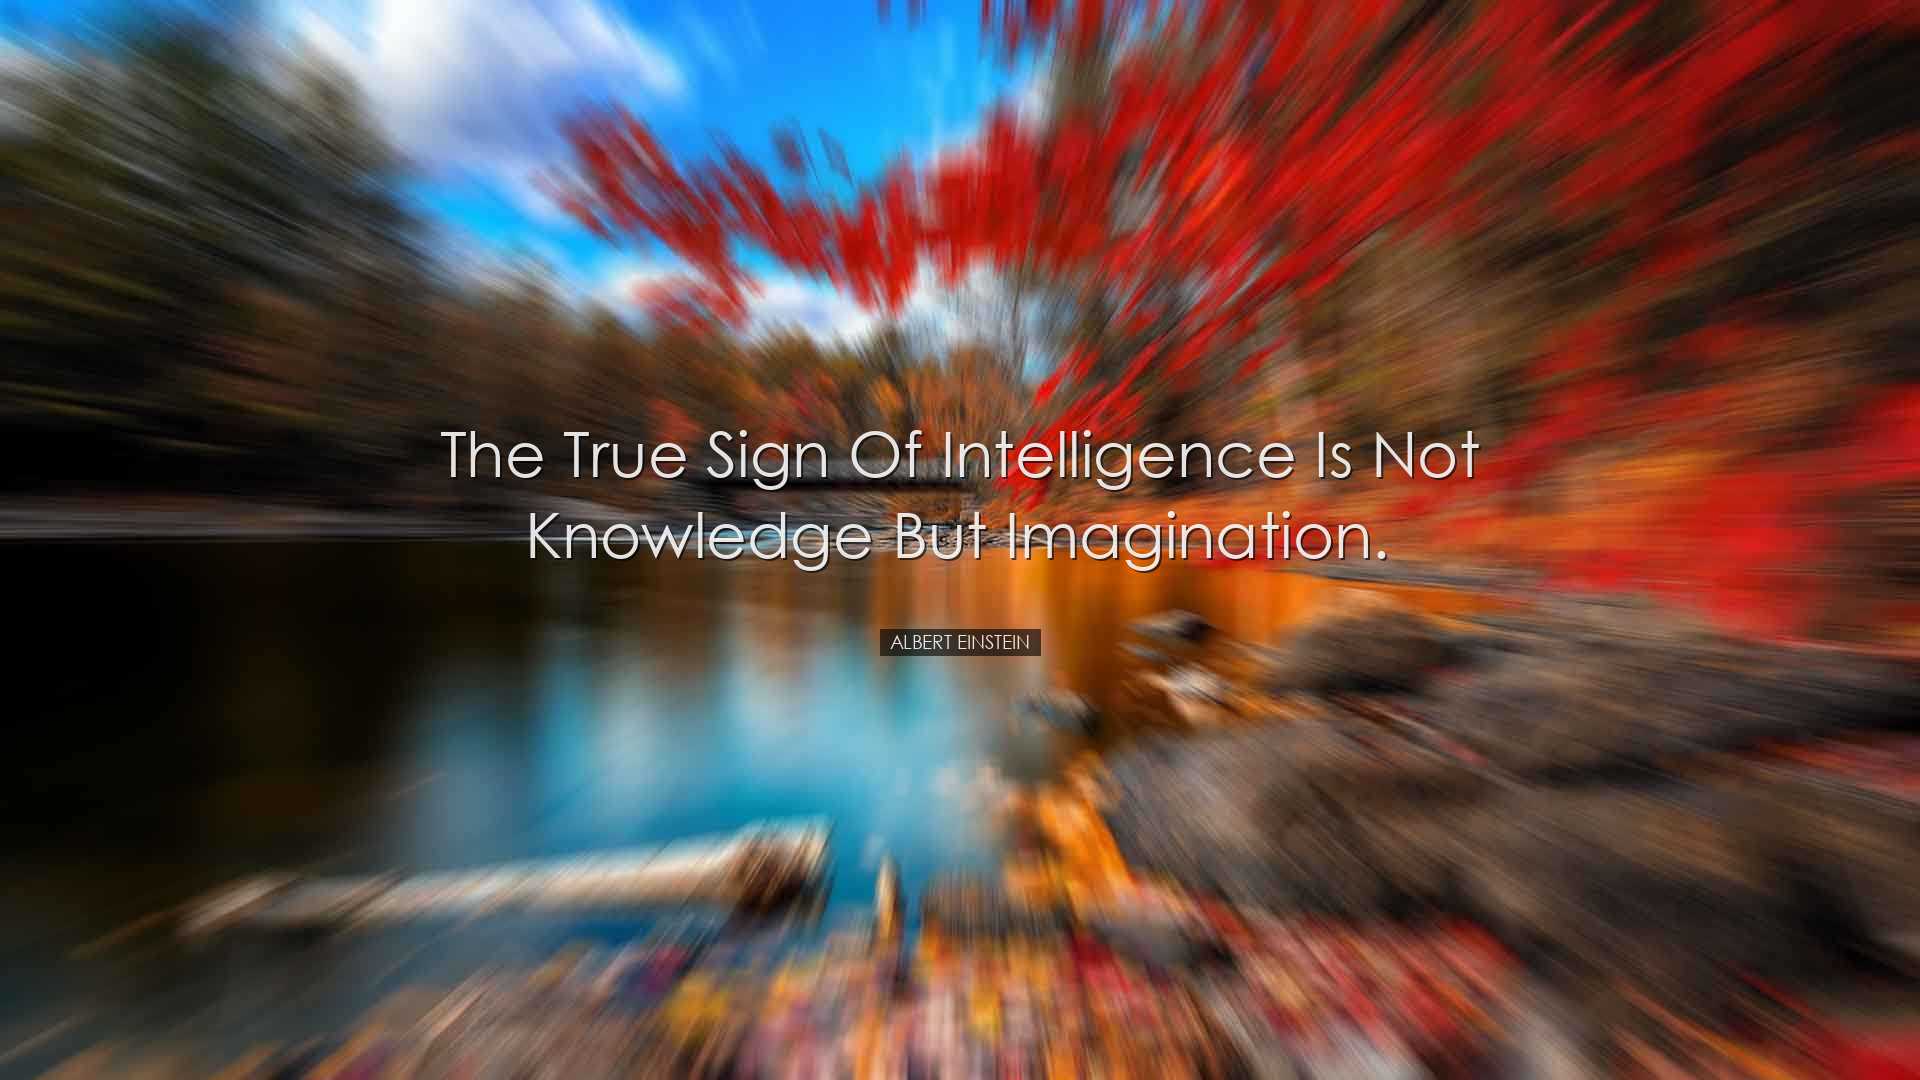 The true sign of intelligence is not knowledge but imagination. -